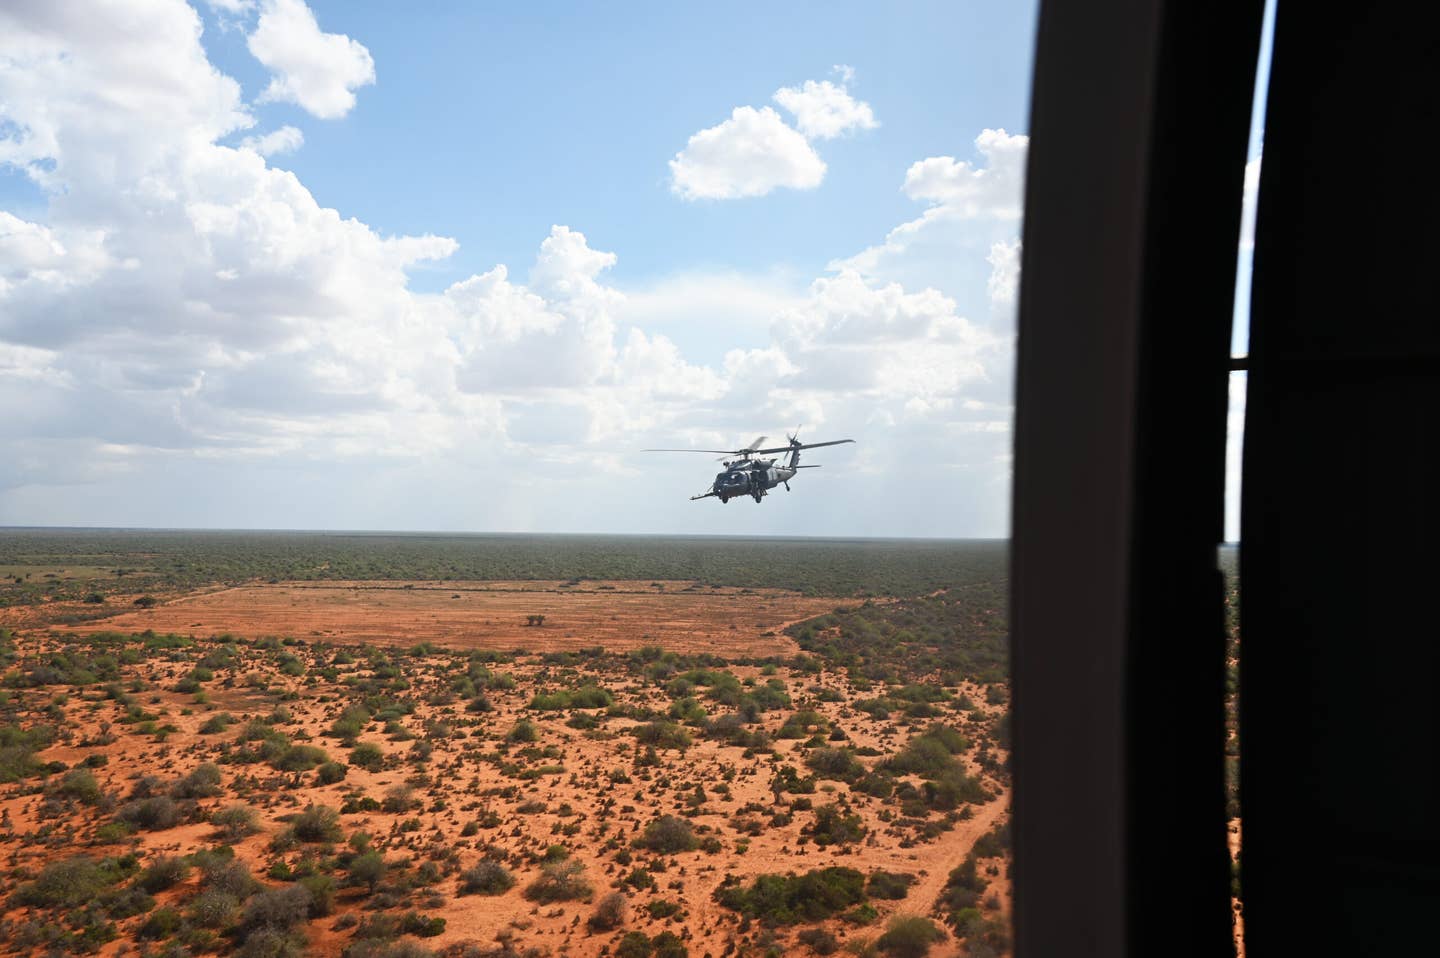 An HH-60W combat rescue helicopter follows behind its wingman in support of a CASEVAC exercise in eastern Africa on Dec. 8, 2022. <em>Credit: U.S. Air Force photo by Tech. Sgt. Jayson Burns</em>